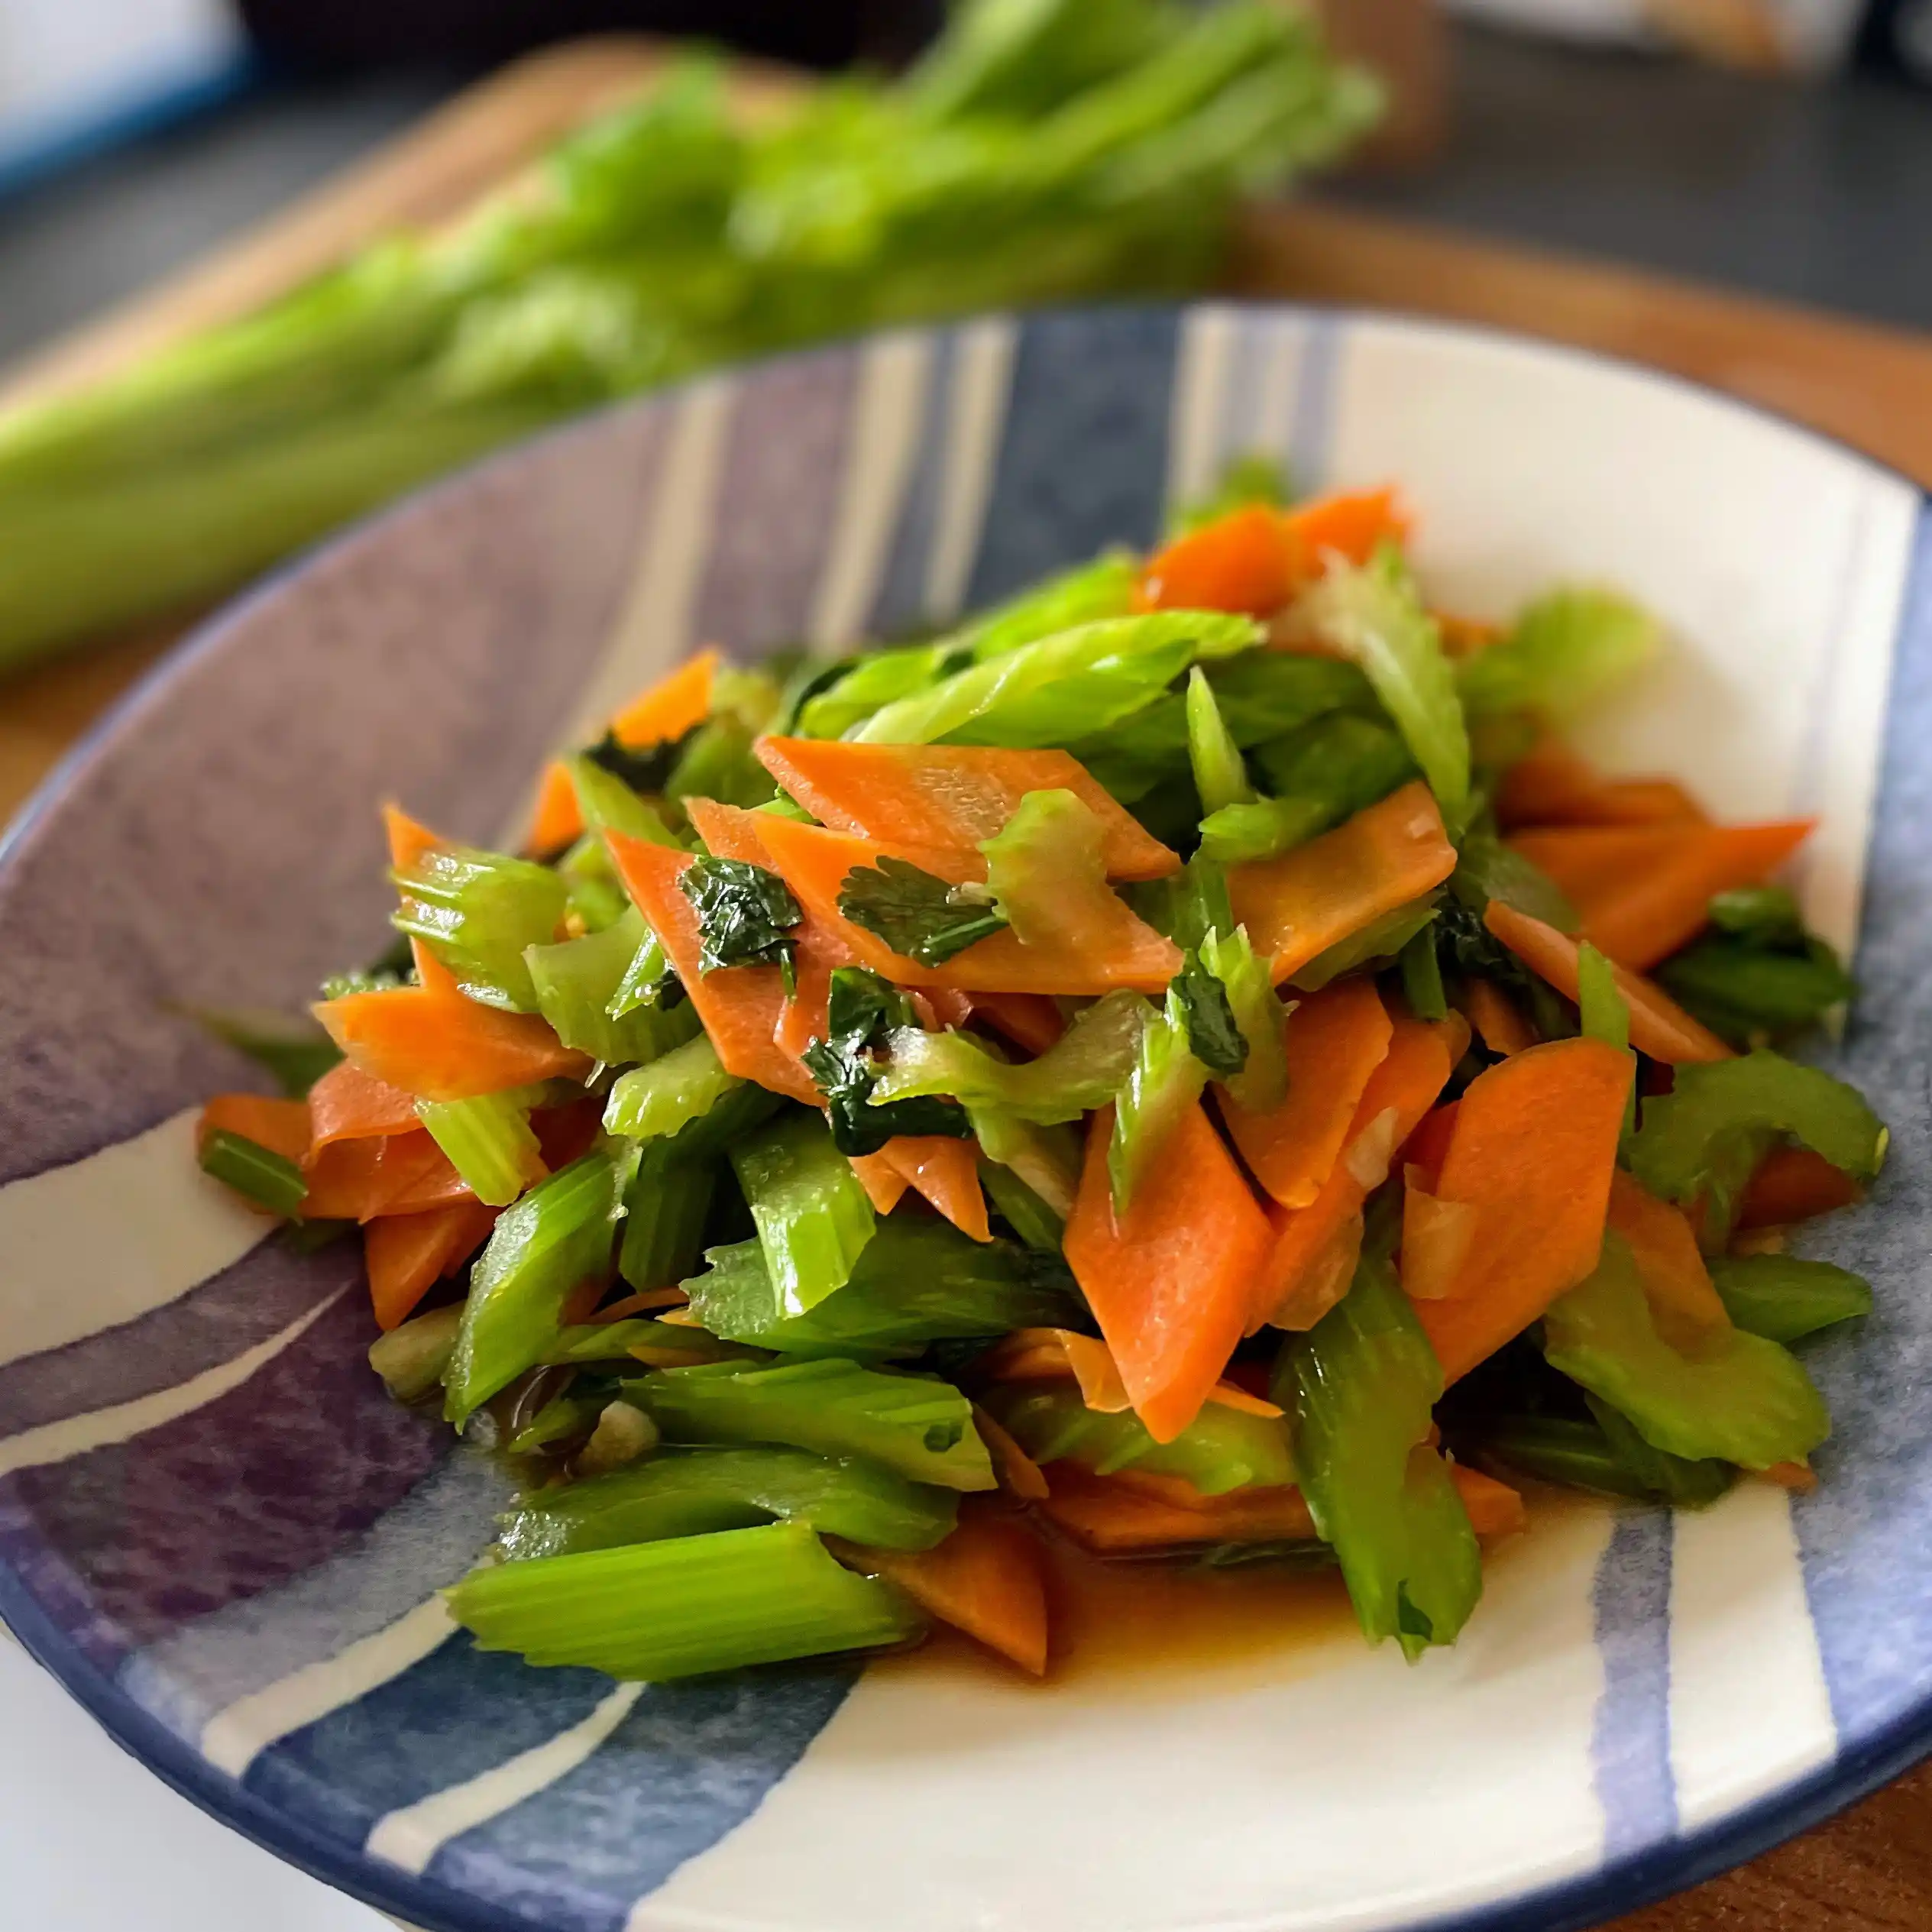 carrots and celery stir fry ready to eat